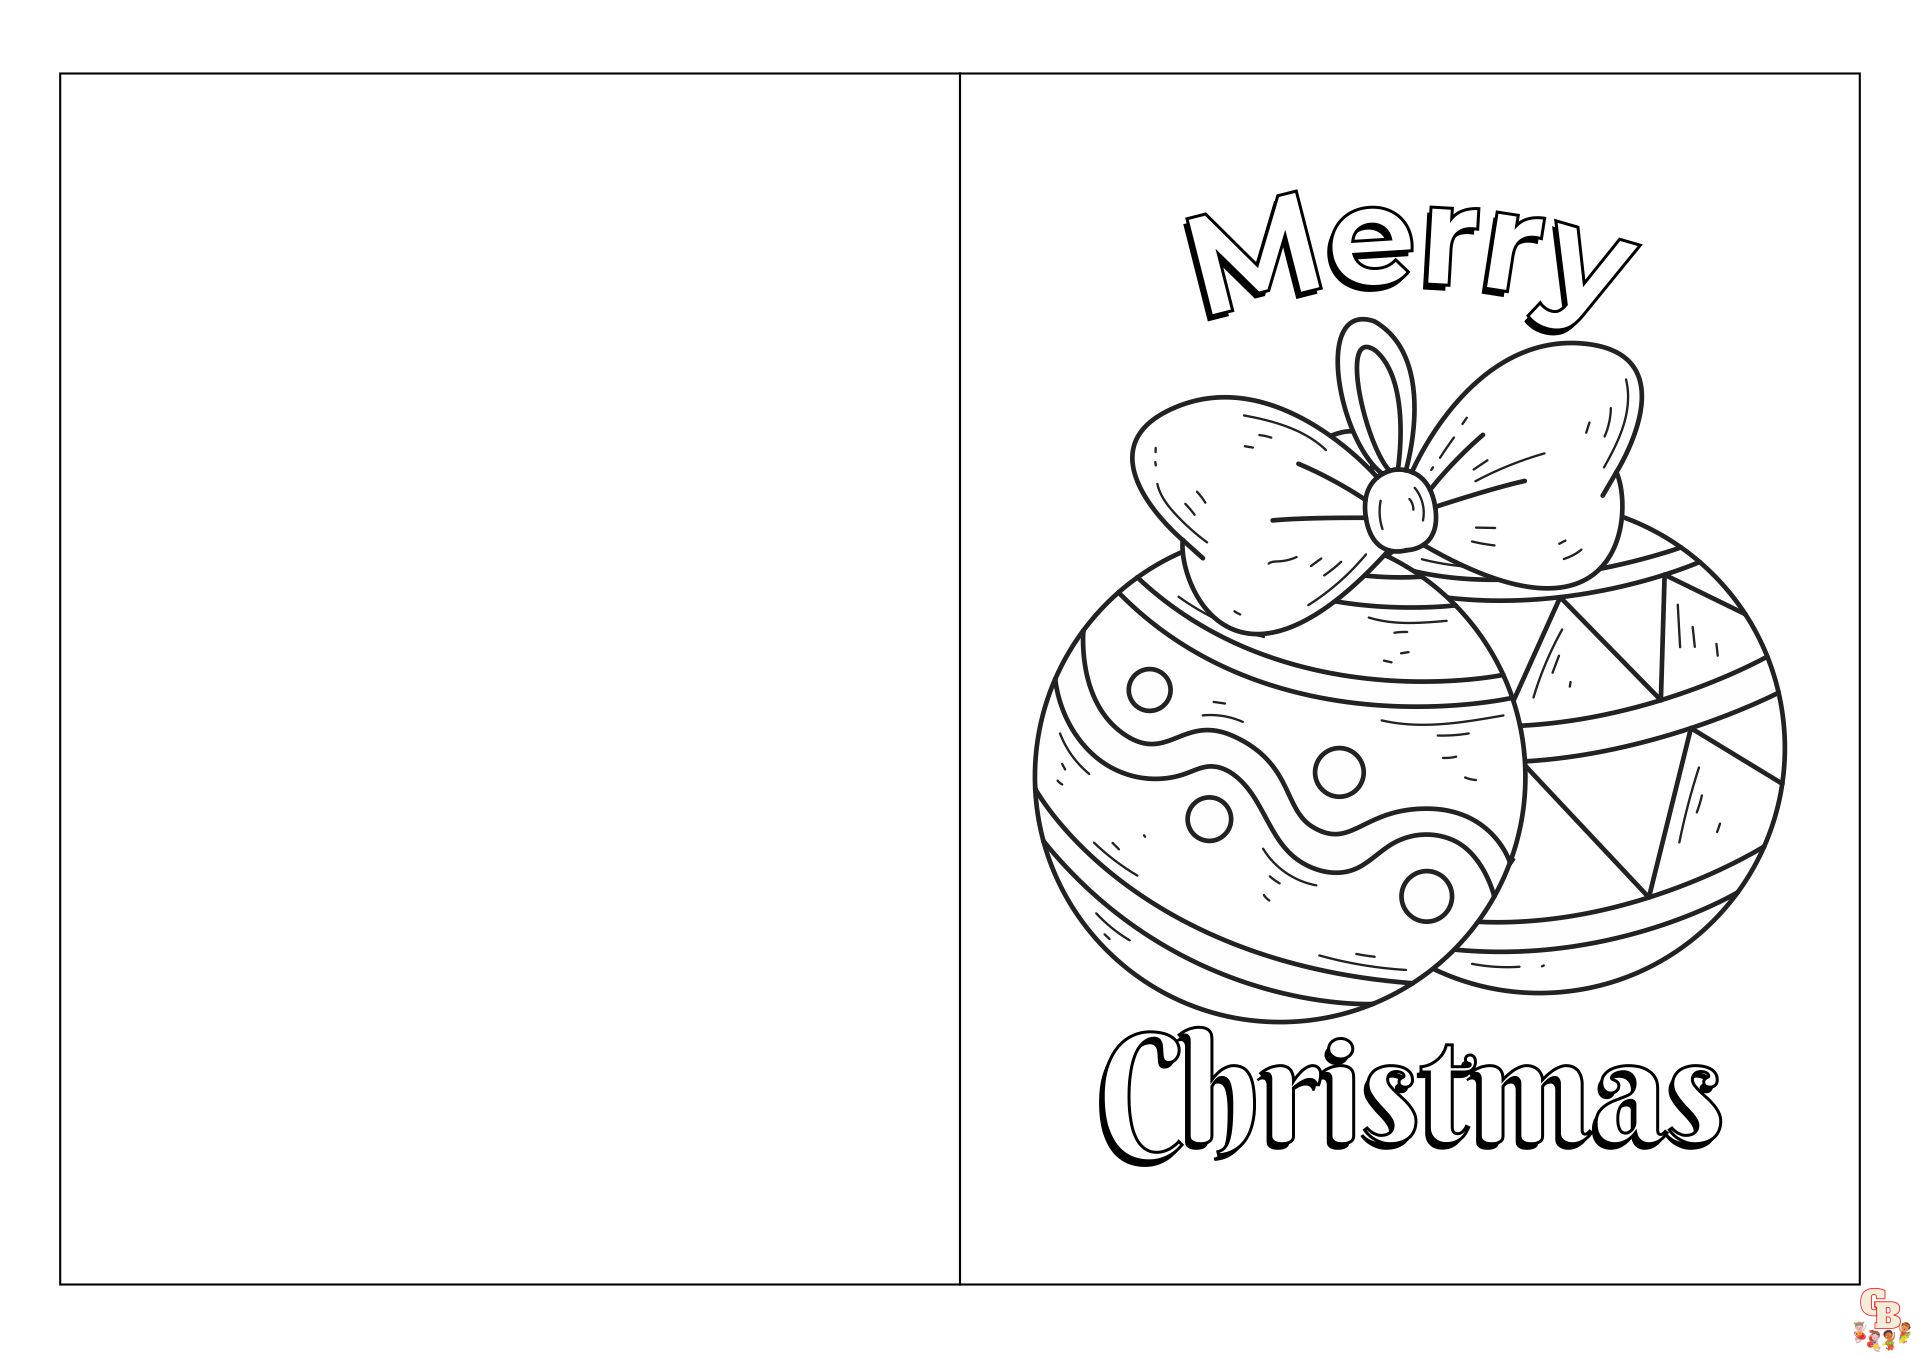 Christmas Cards Coloring Pages 3